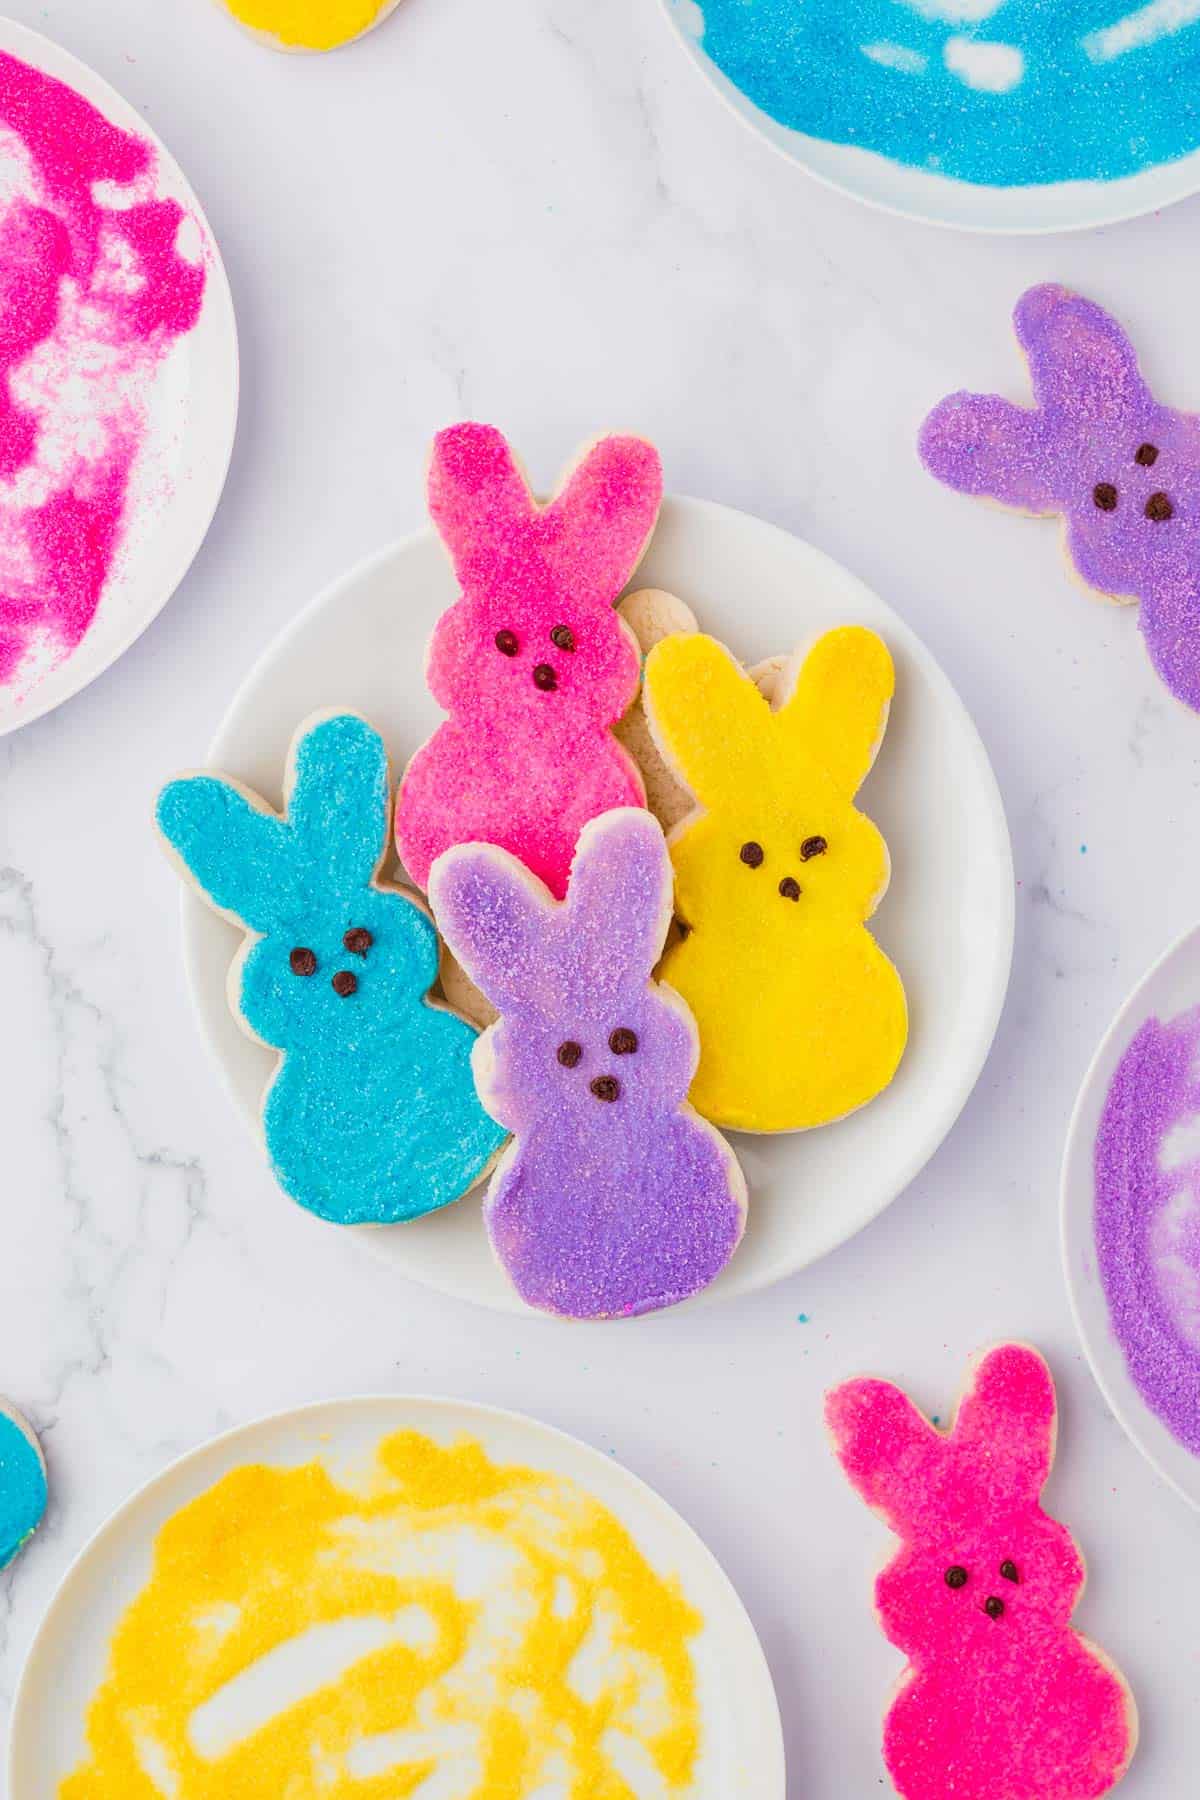 pink, yellow, blue and purple peeps bunny sugar cookies on a white plate, surrounded by bowls of colored sugar and more cookies